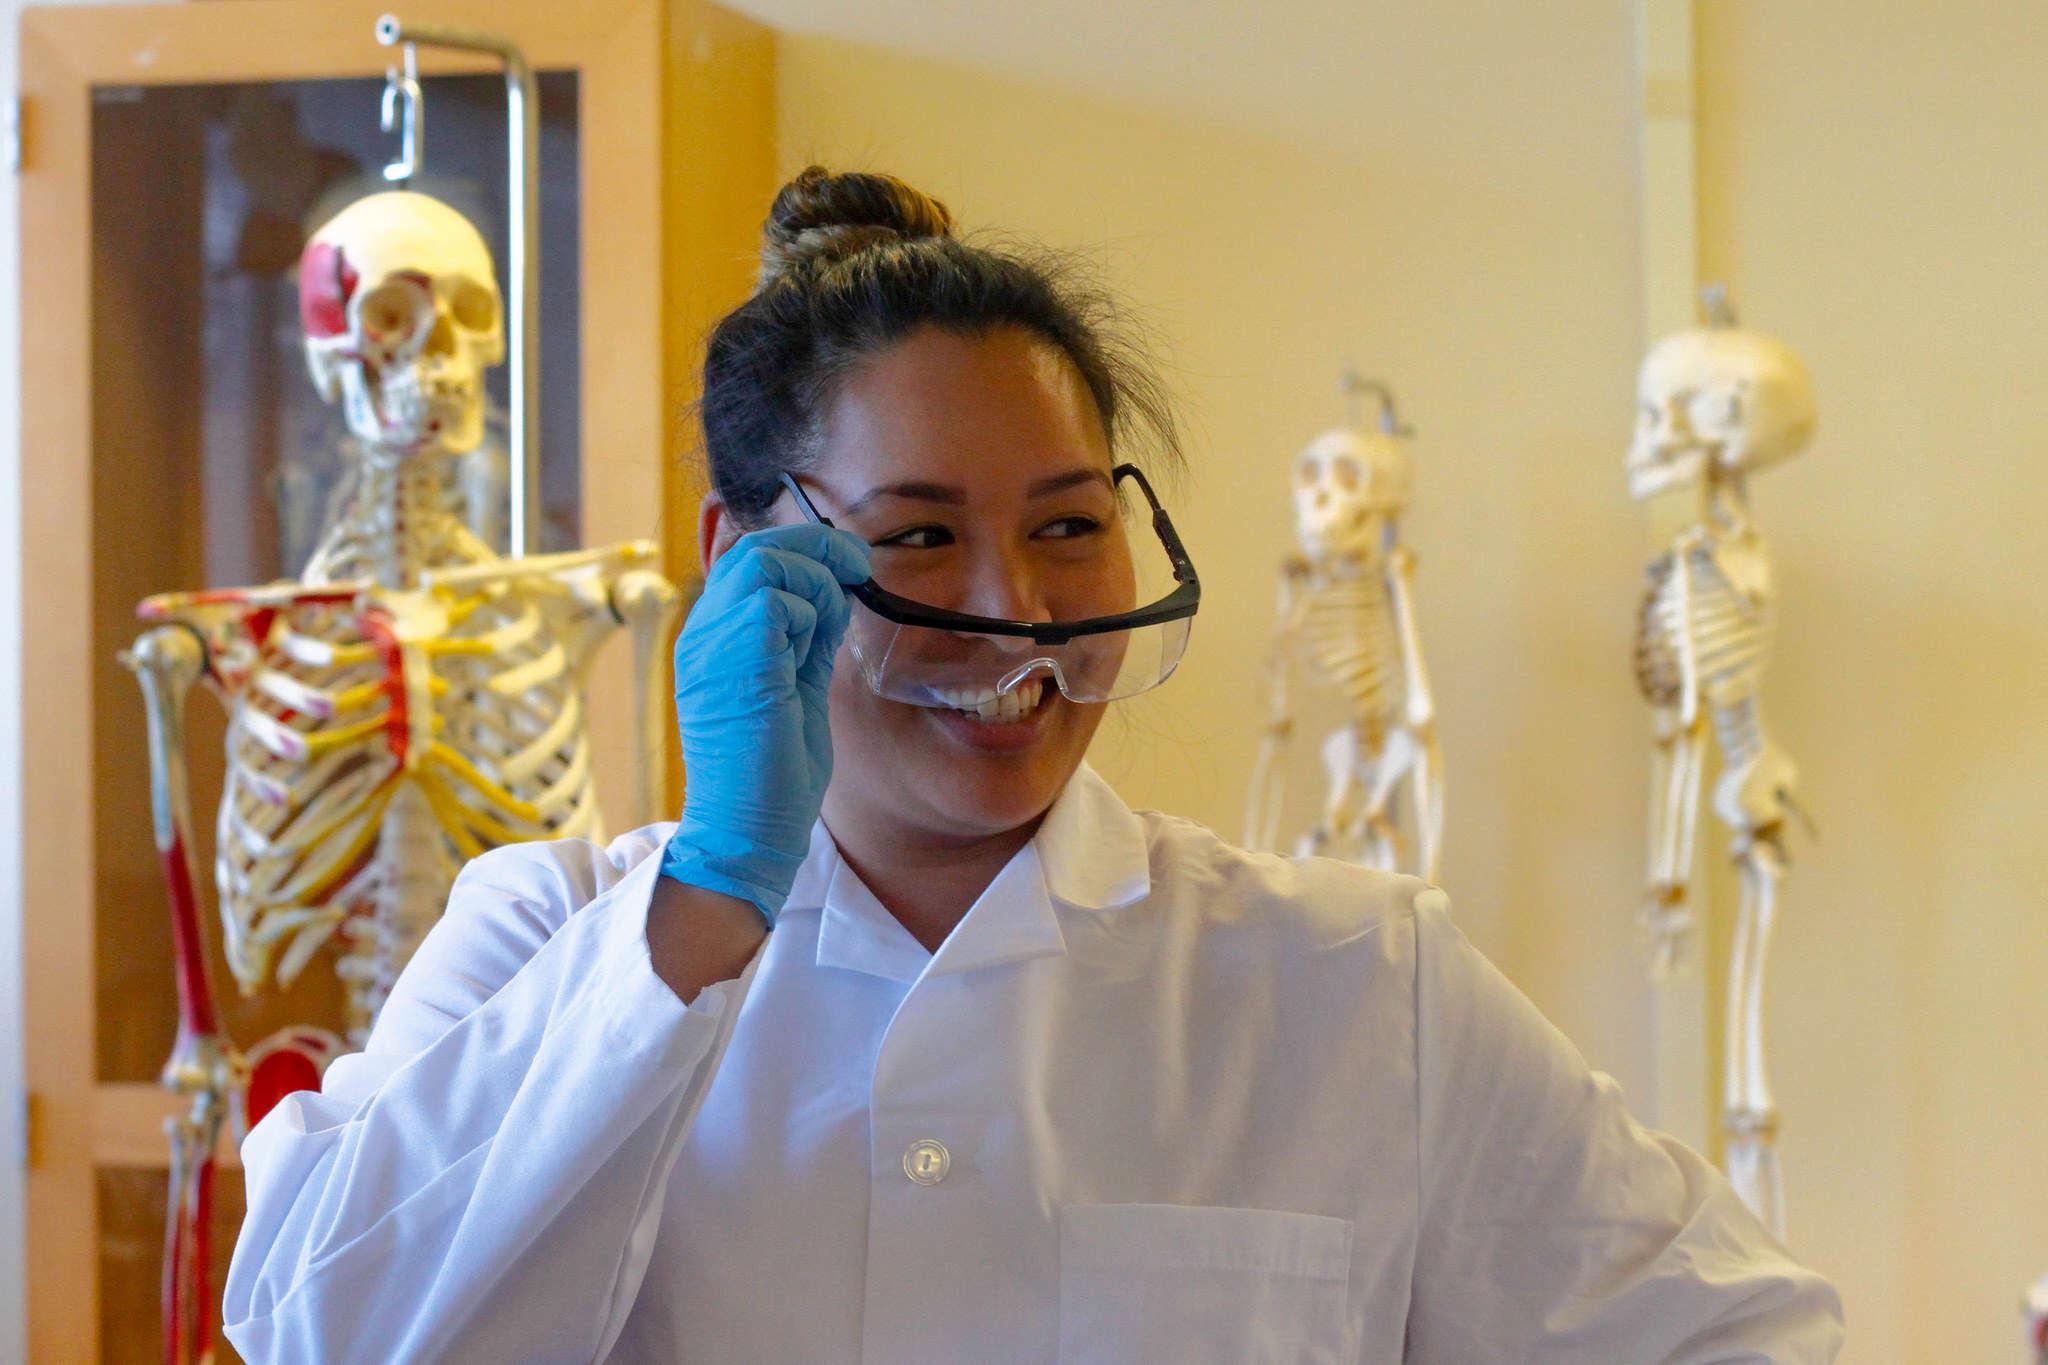 SF State senior Rachel Morales puts on her glasses in the dry lab as she prepares to dissect cadavers for her human anatomy class Thursday, March 5. 2015. (Angelica Ekeke / Xpress)